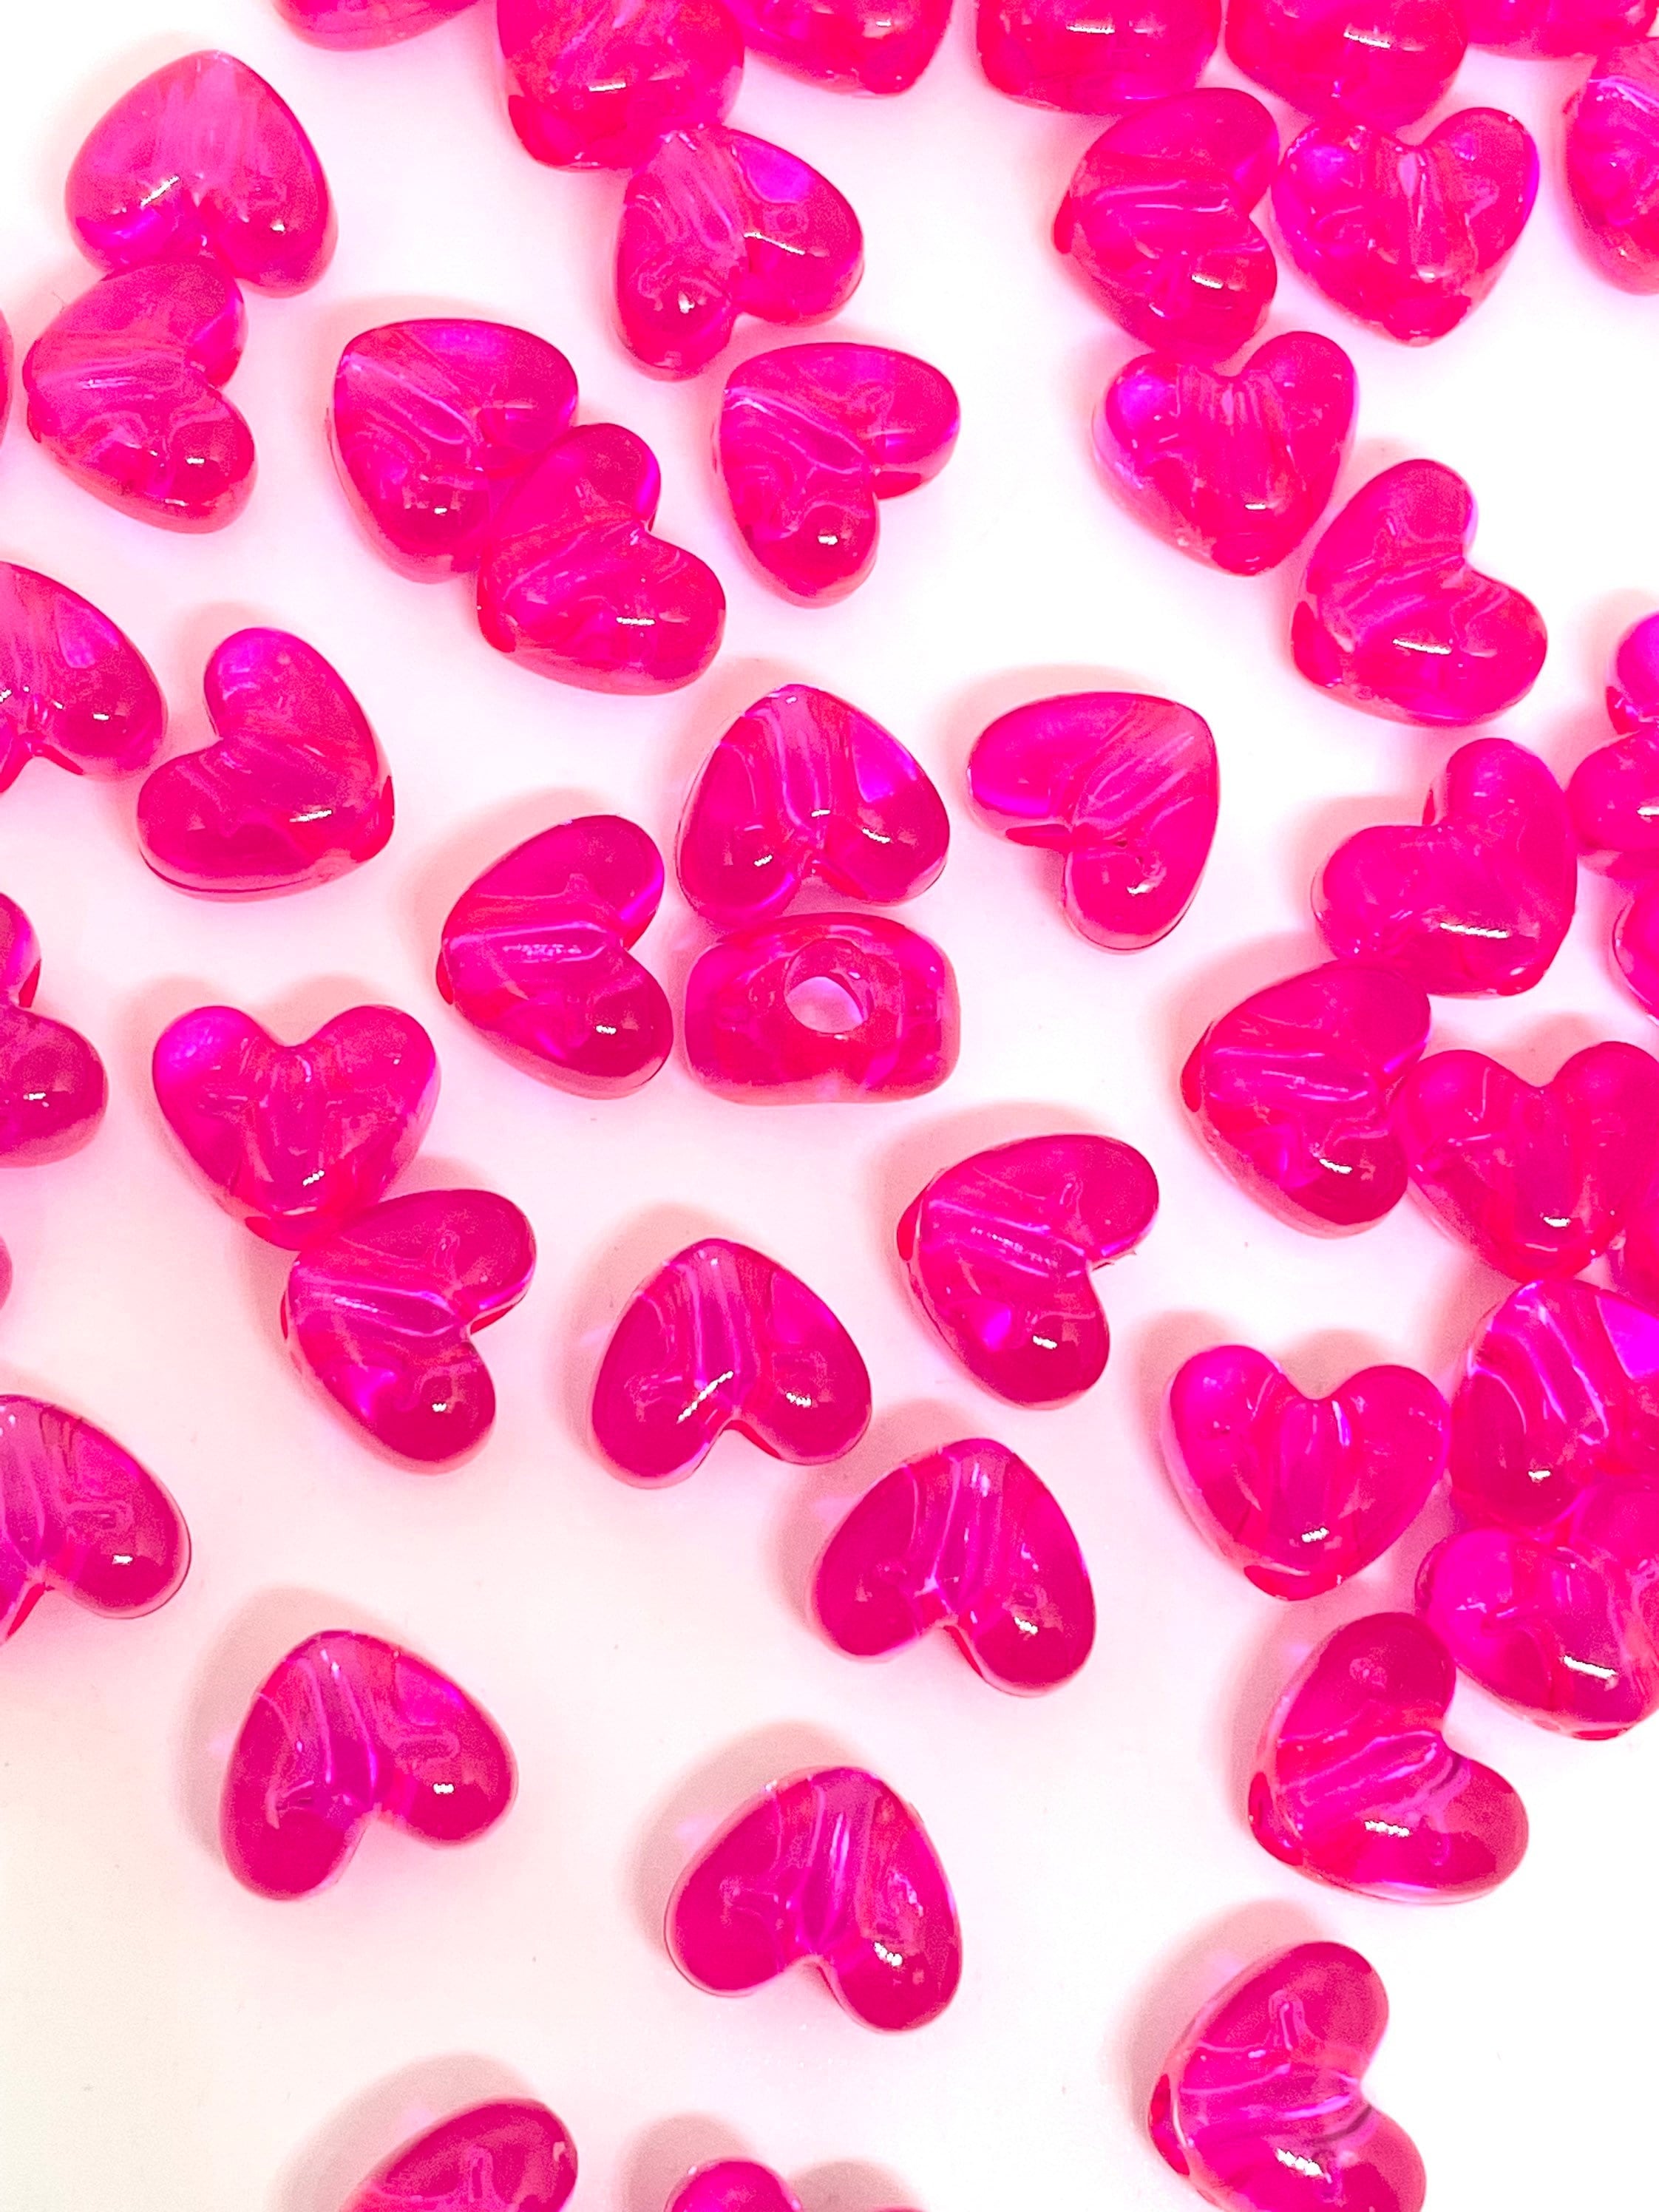 Hot Pink Heart Beads for Jewelry Making, Bright Pink Beads for